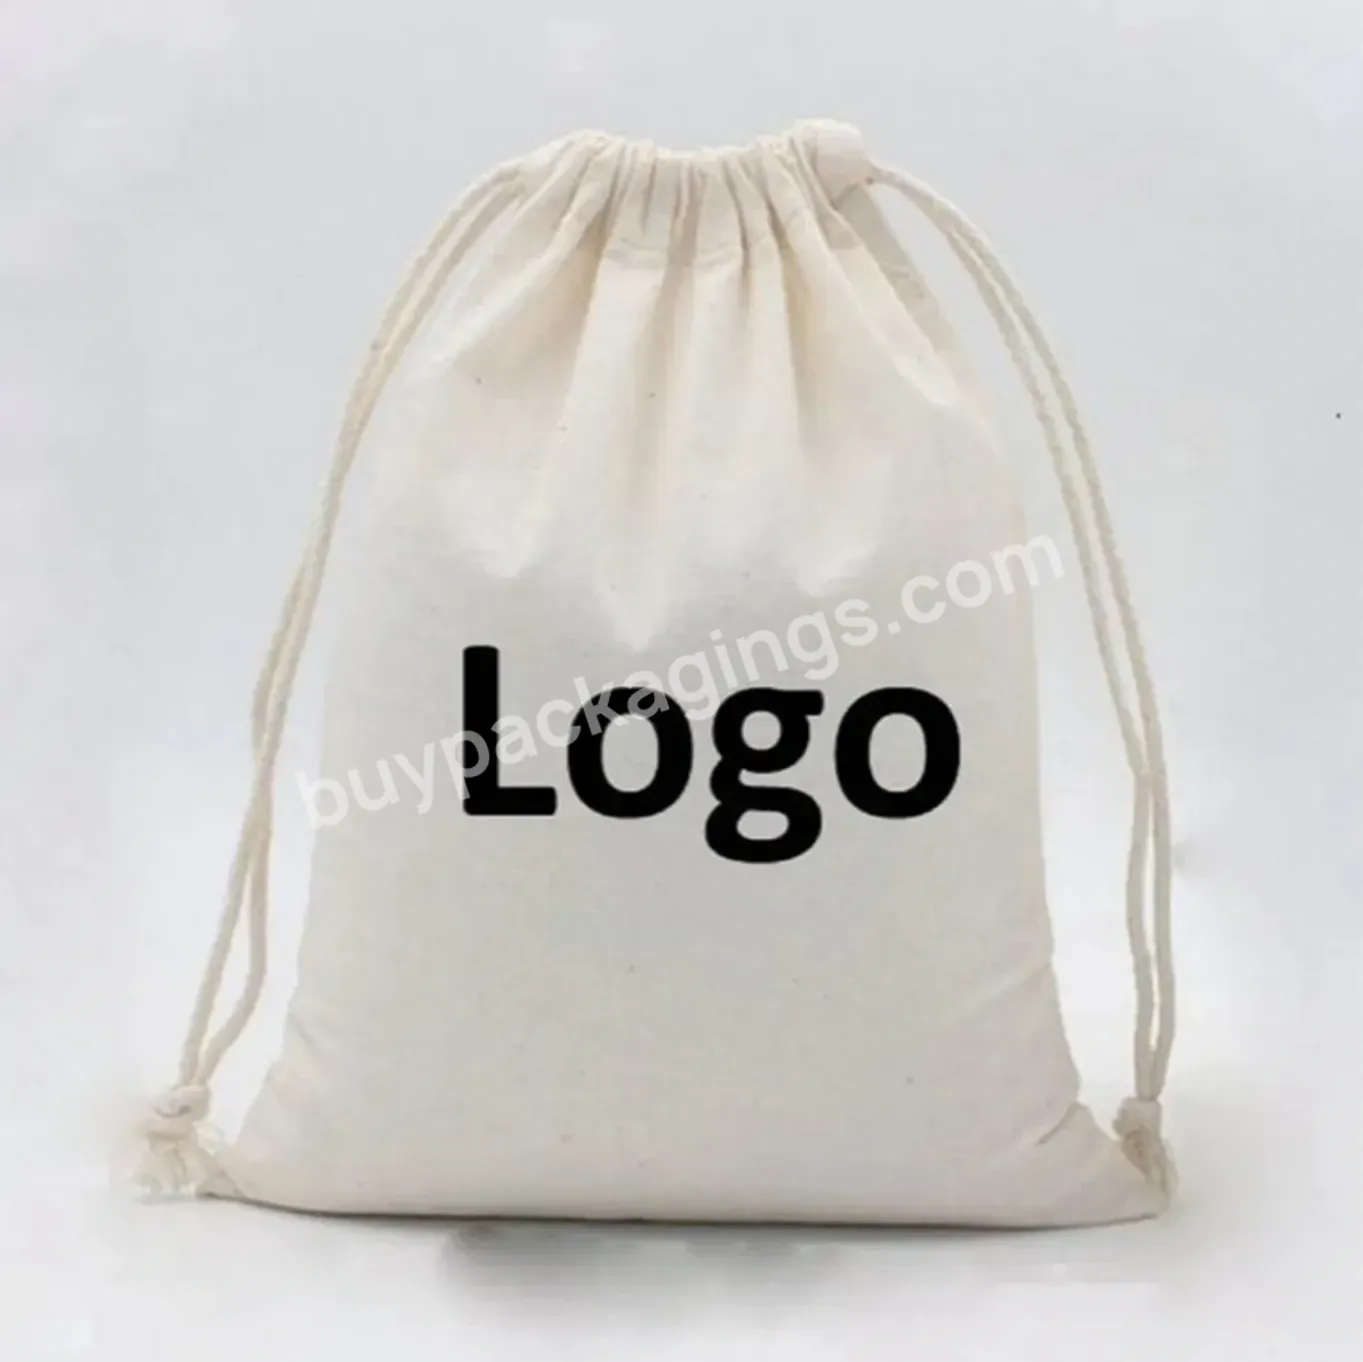 New Style Lower Price Shopping Bag Shopping Bag Cloth Cotton Muslin Jewelry Pouch Bags For Jewelry With Custom Letter - Buy Self Satin Bag For Wicks,Cloth Bags For Jewelry With Custom Logo,Bags For Jewelry Bags.